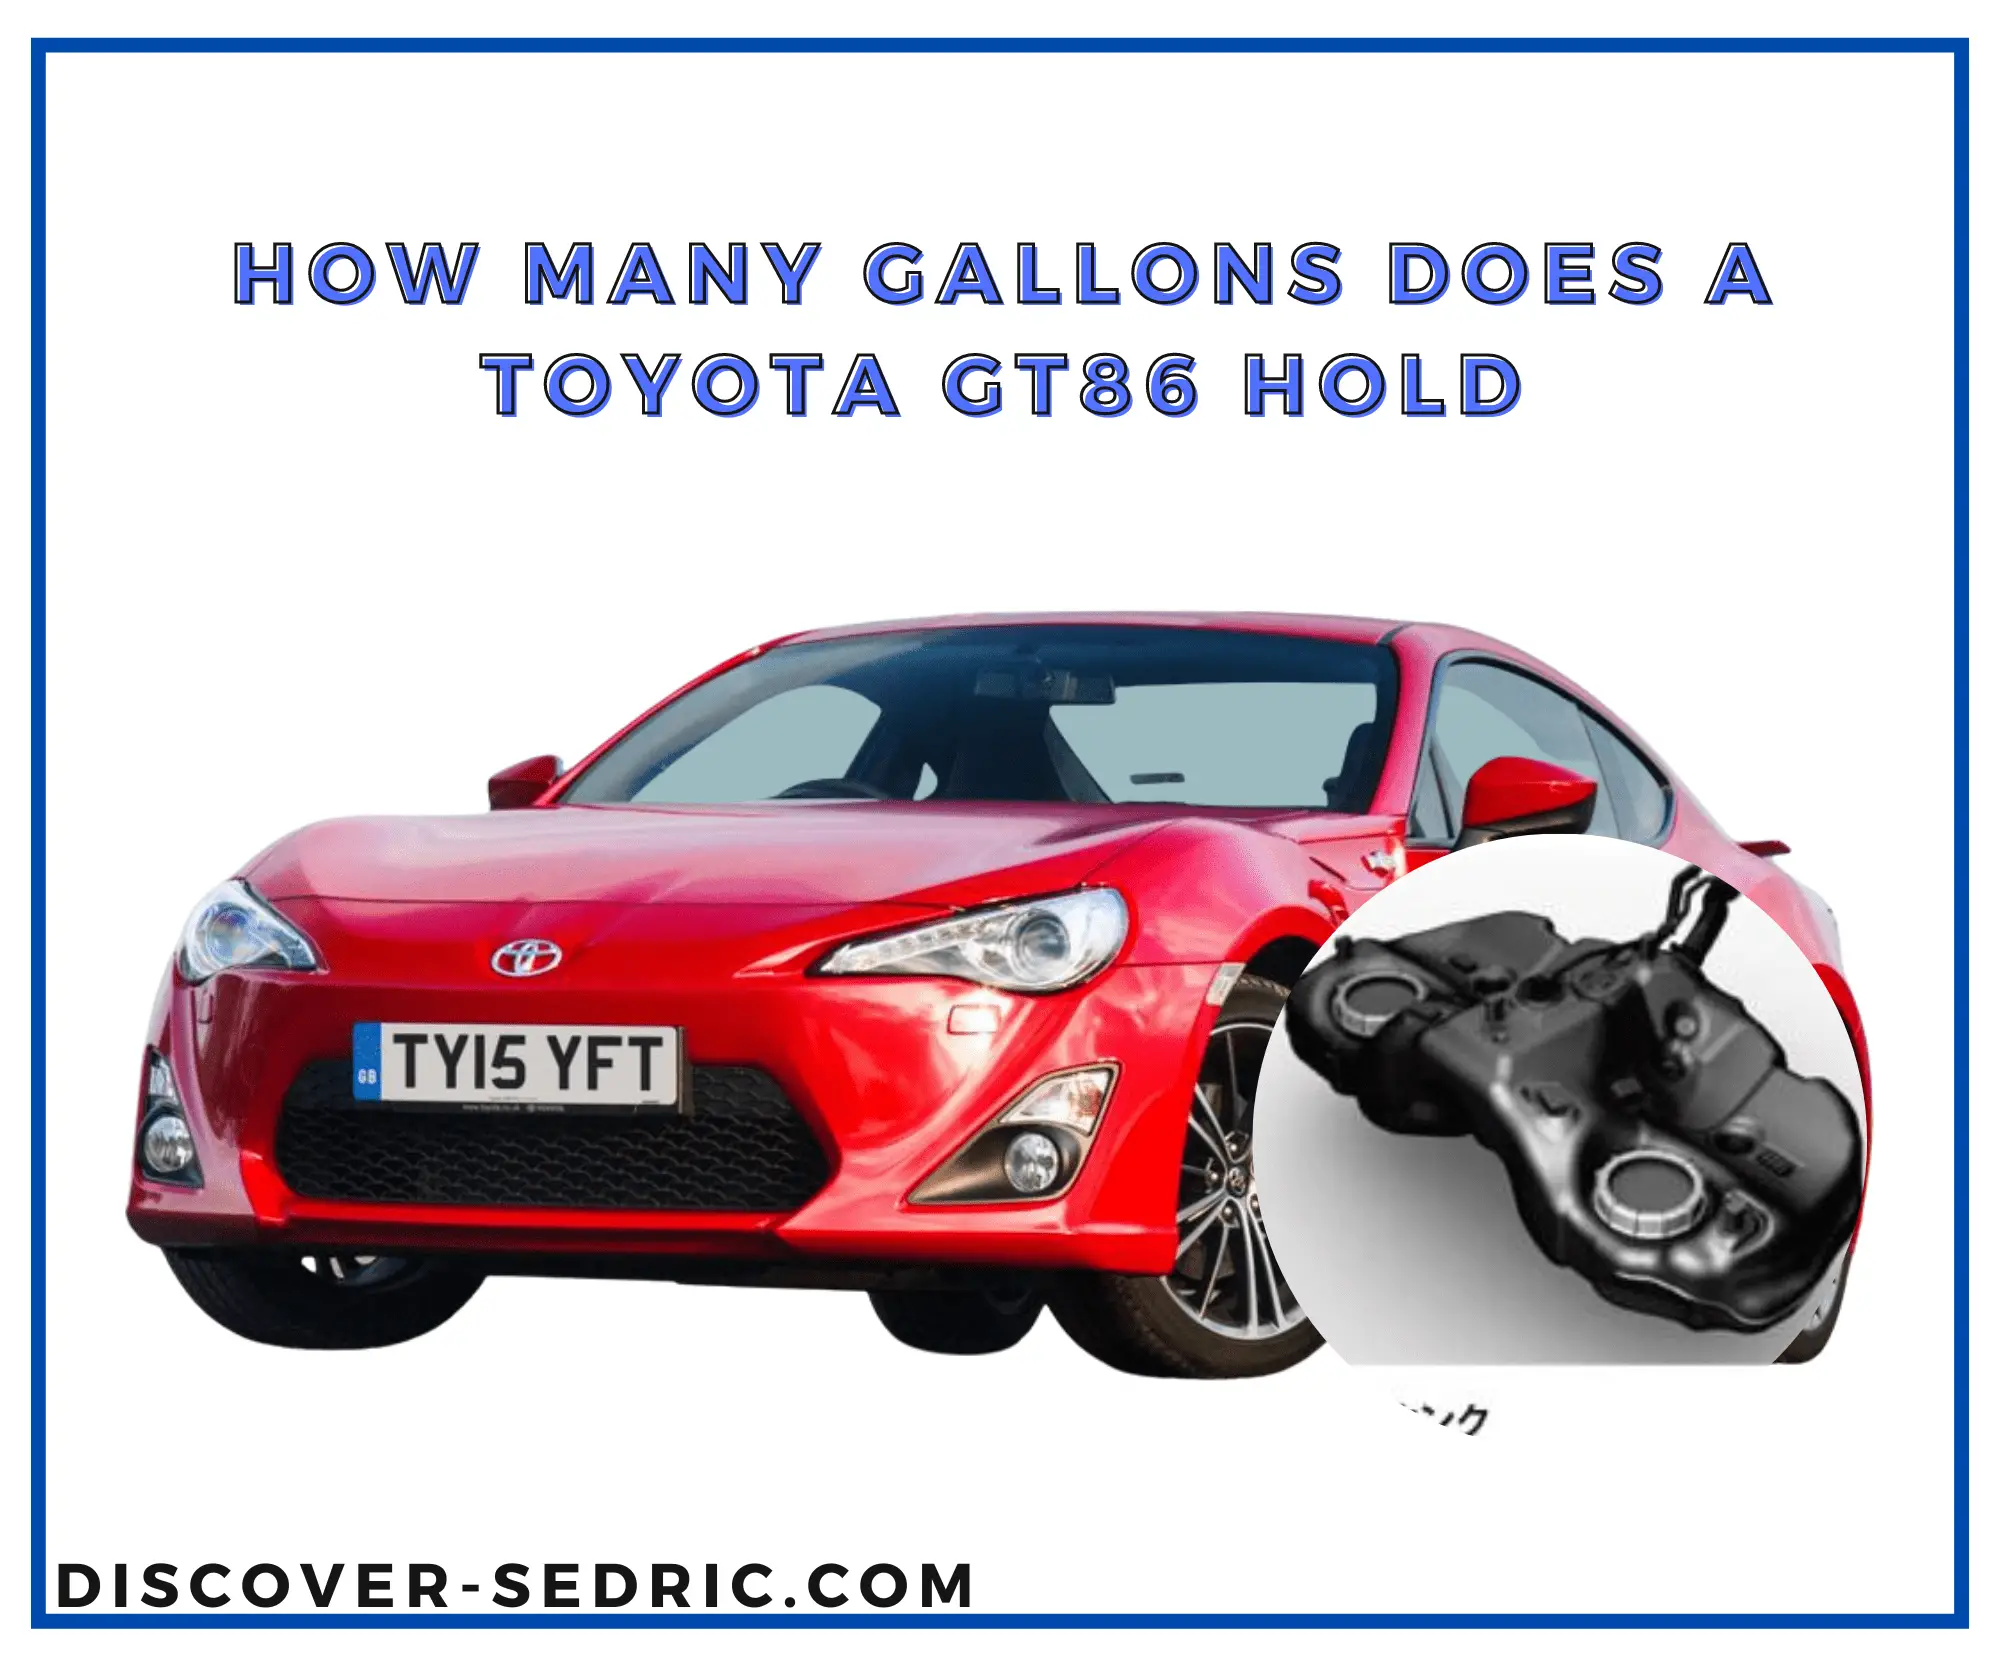 Gallons Does A Toyota gt86 Hold